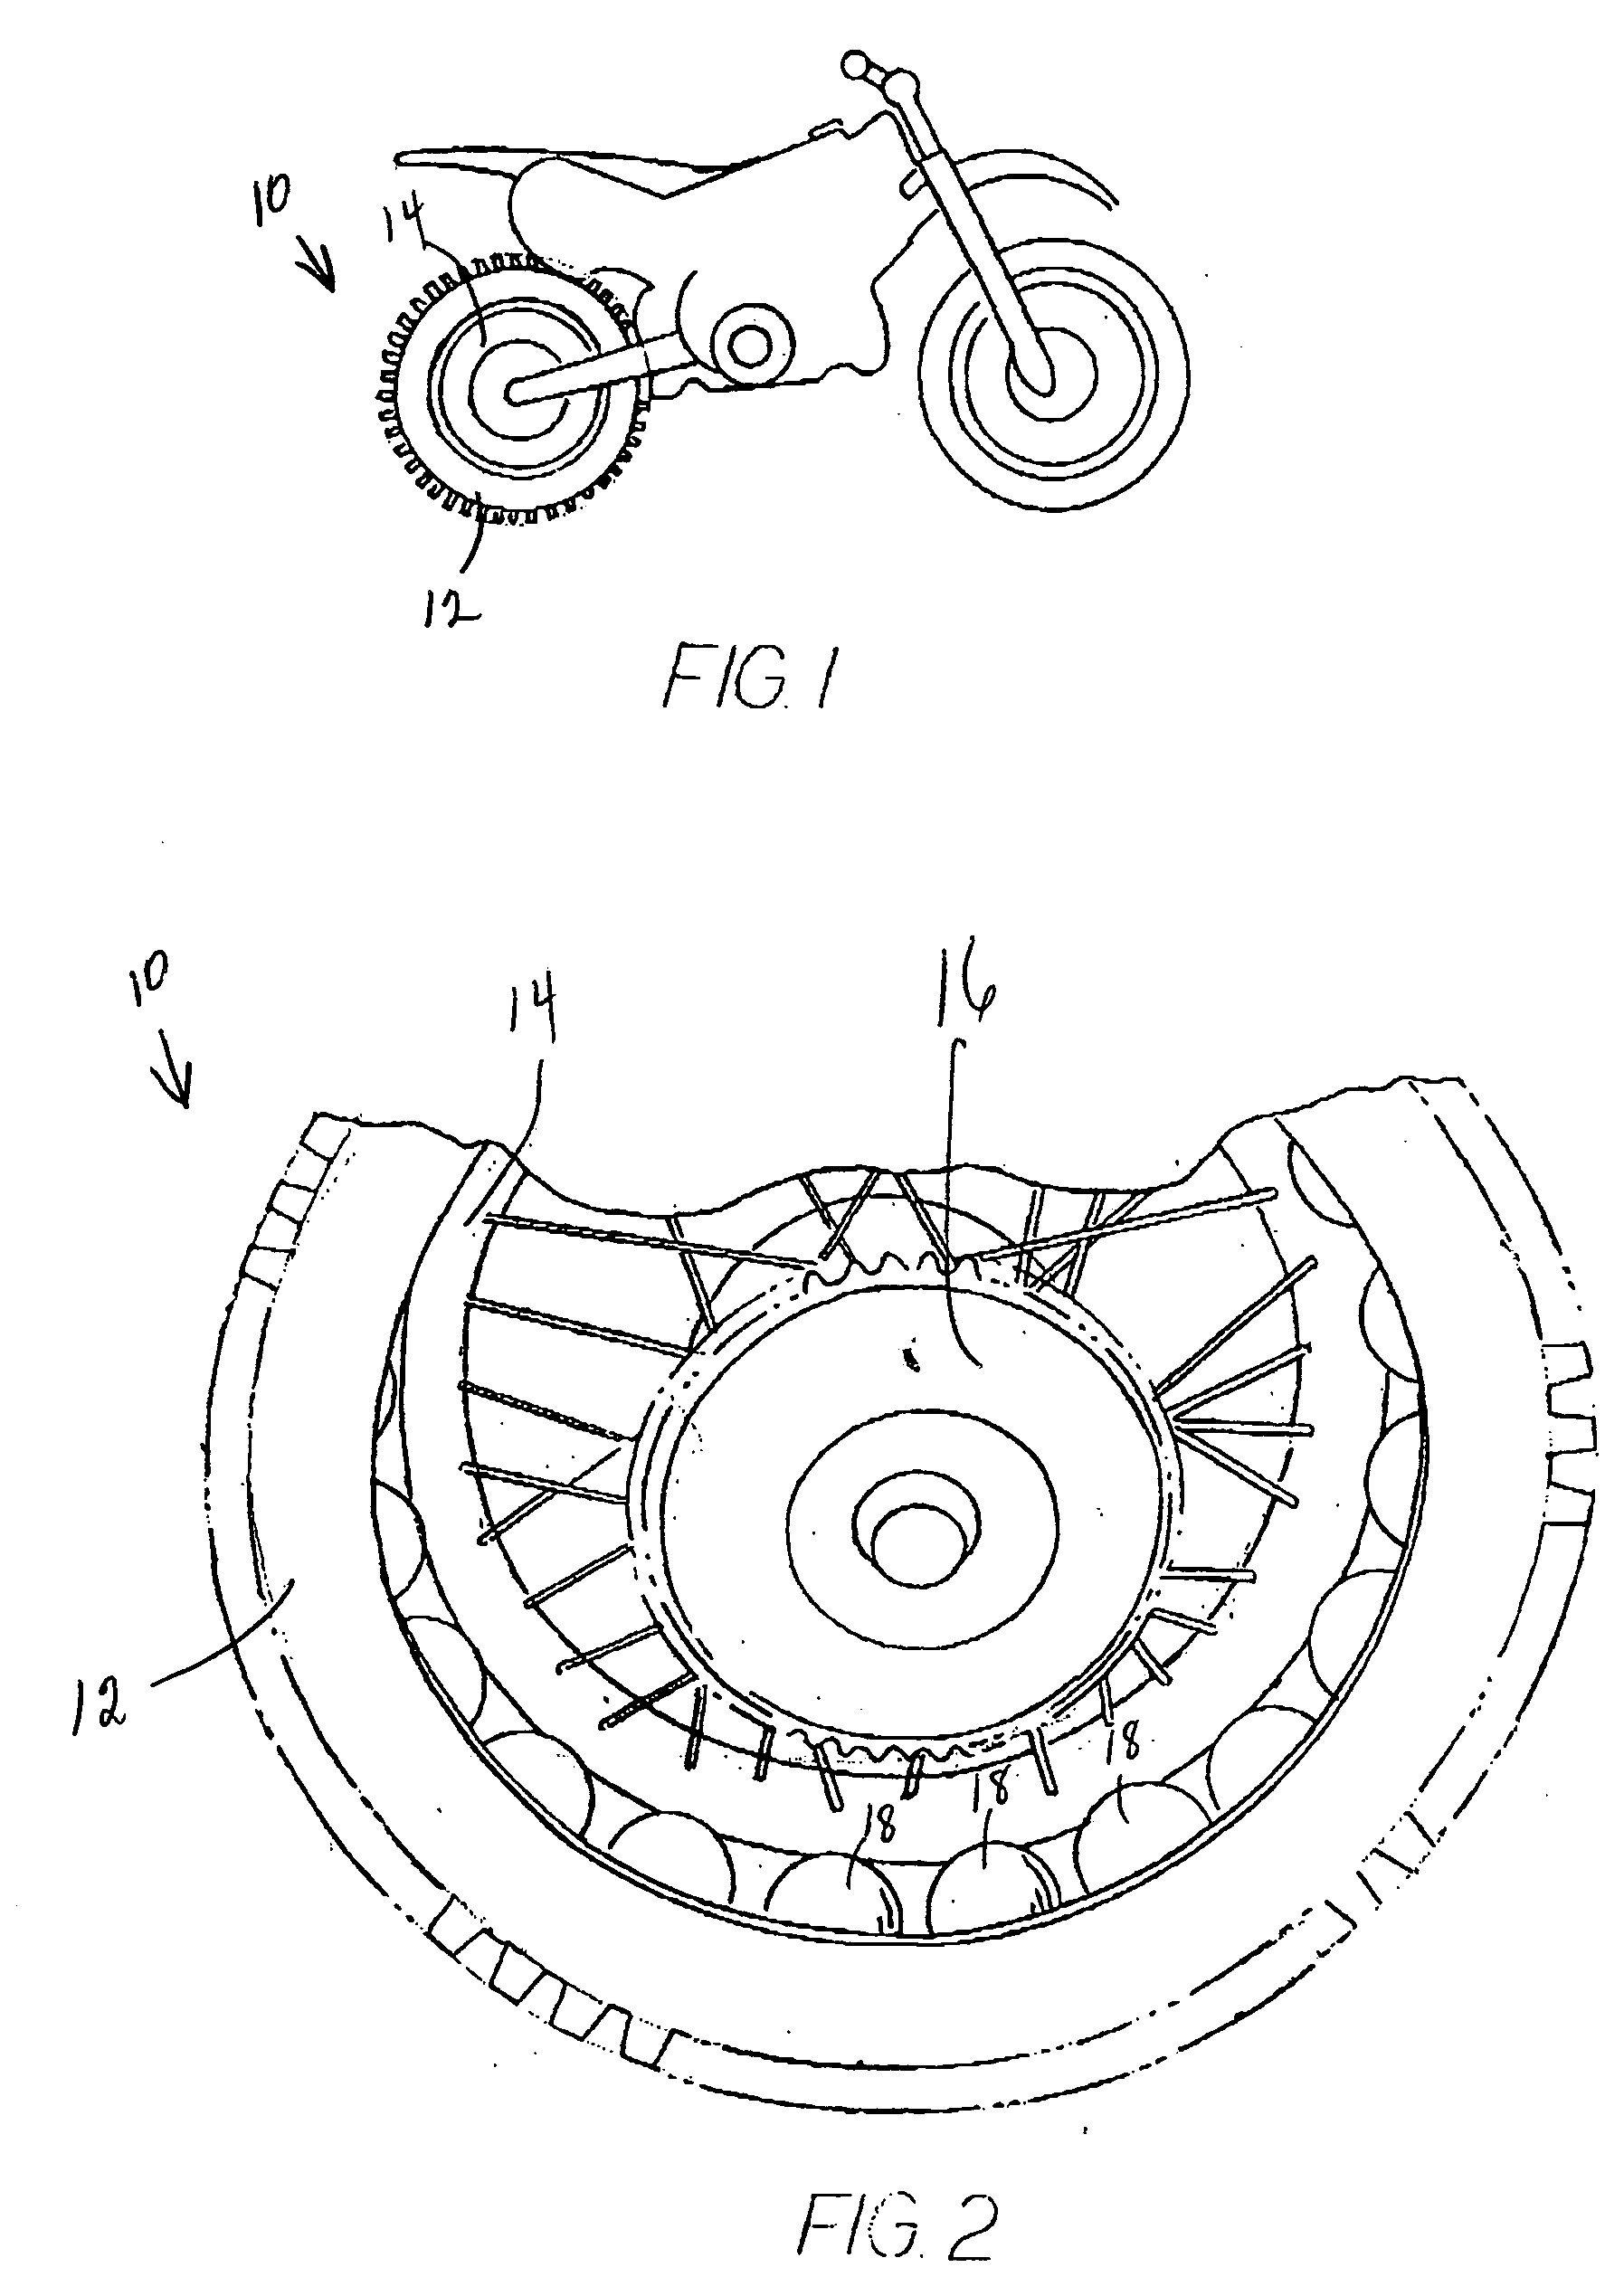 Ball for use in a tire assembly